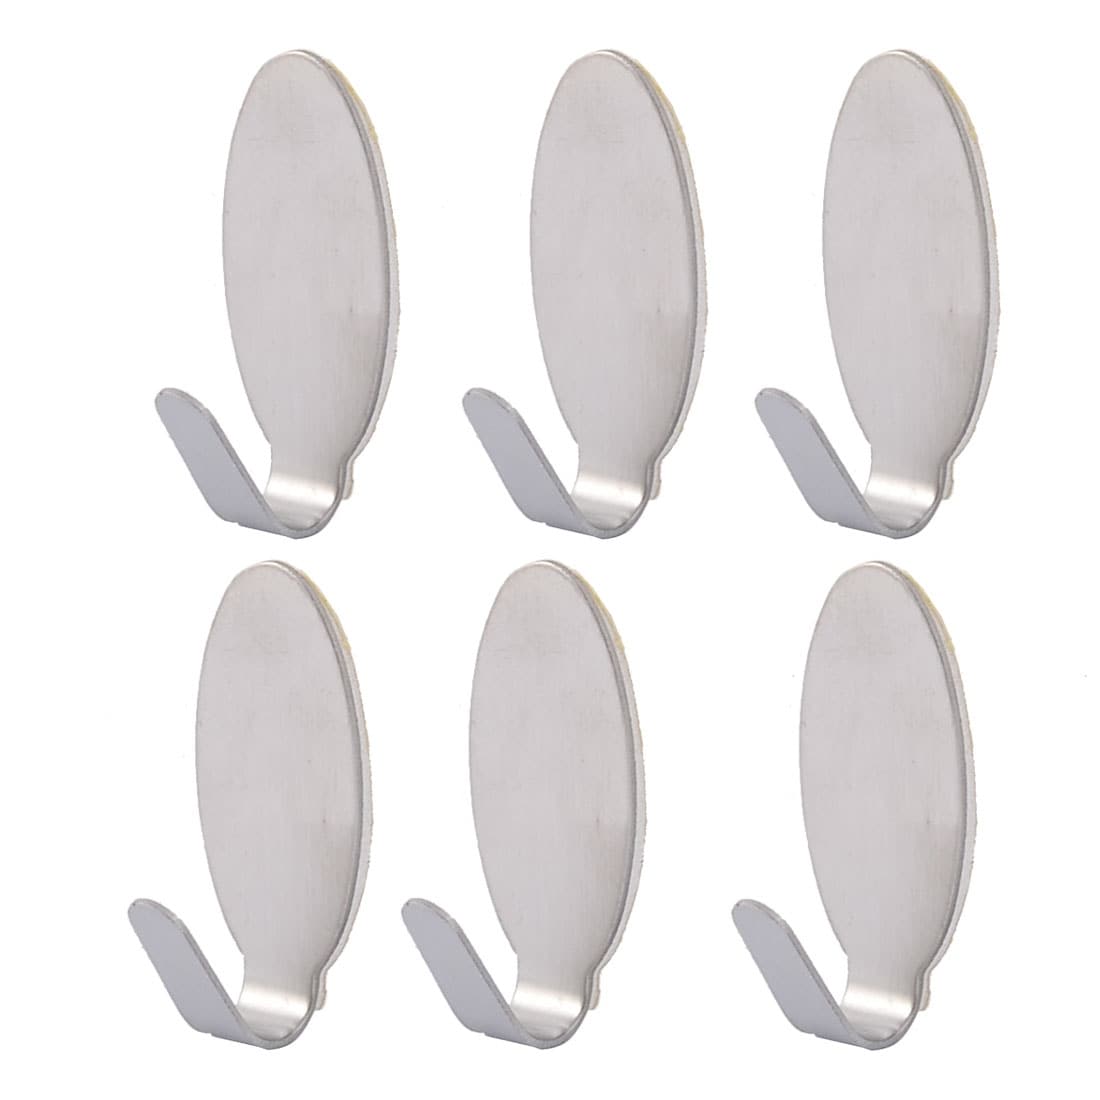 4 x SELF ADHESIVE STICK ON HOOKS Brown Oval Hat/Coat Door/Wall Sticky Hanger 